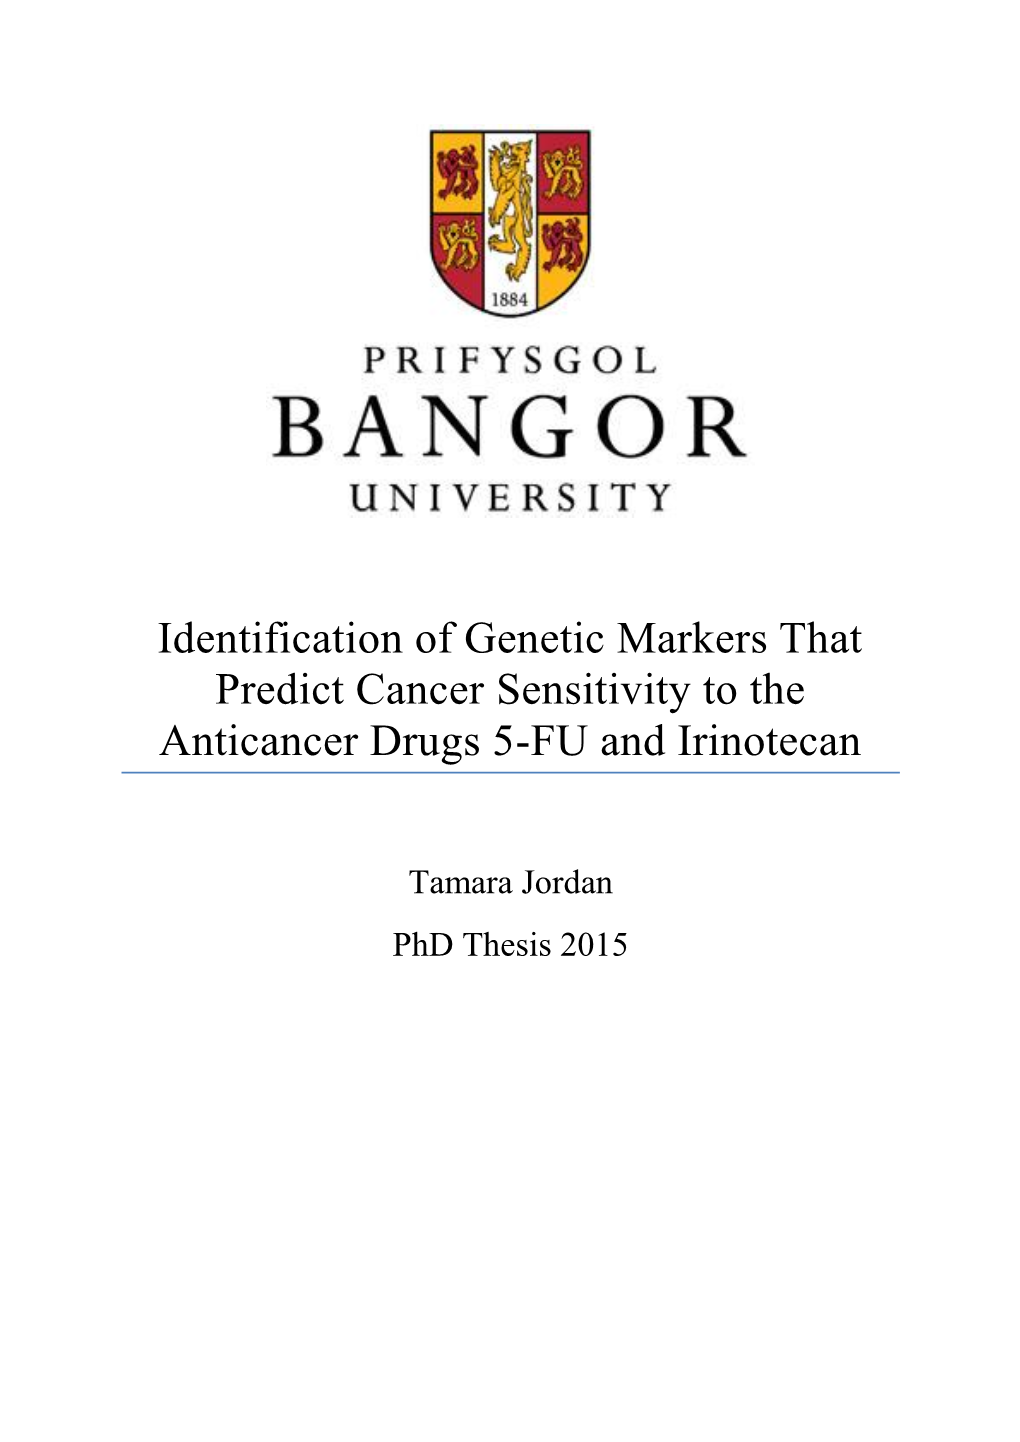 Identification of Genetic Markers That Predict Cancer Sensitivity to the Anticancer Drugs 5-FU and Irinotecan